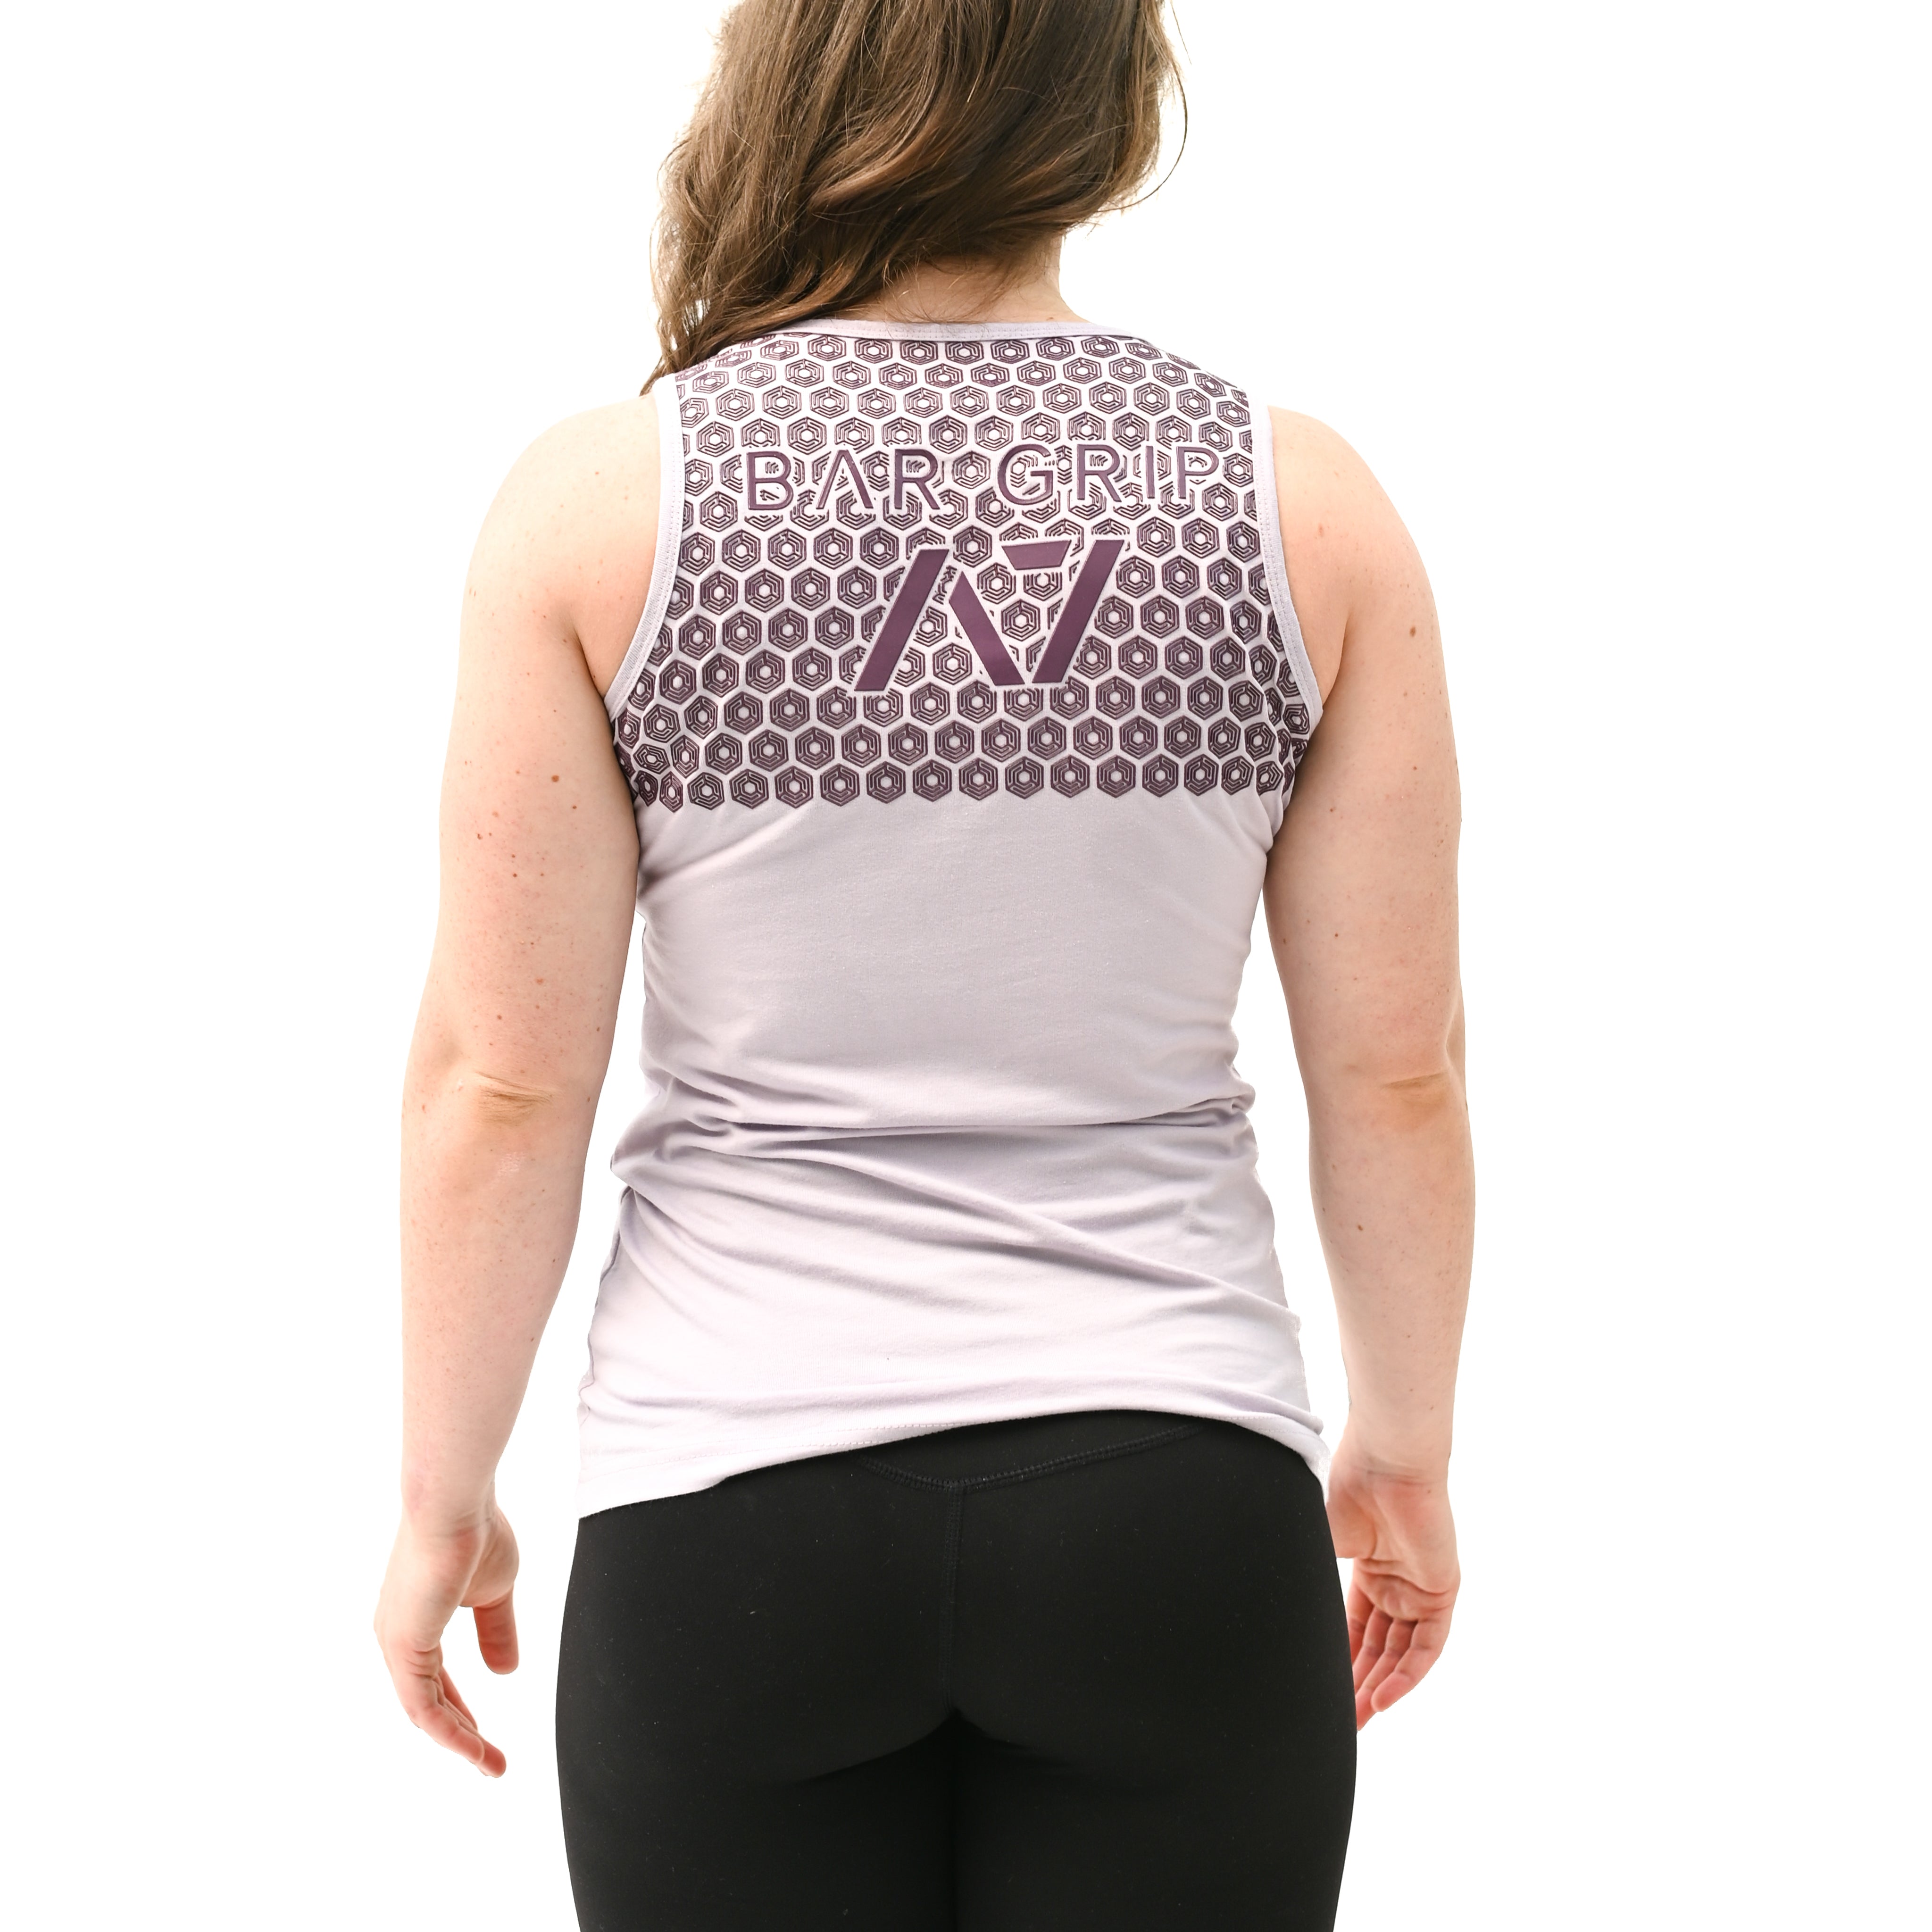 Delta Link Lavender Bar Grip Tank T-shirt, great as a squat shirt. Purchase Delta Link Lavender Bar Grip Shirt from A7 UK. Purchase Delta Link Lavender Bar Grip Shirt Europe from A7 Europe. No more chalk and no more sliding. Best Bar Grip T shirts, shipping to UK and Europe from A7 UK. Delta Link Lavender Bar Grip Shirt includes. A7UK has the best Powerlifting apparel for all your workouts. Available in UK and Europe including France, Italy, Germany, the Netherlands, Sweden and Poland.